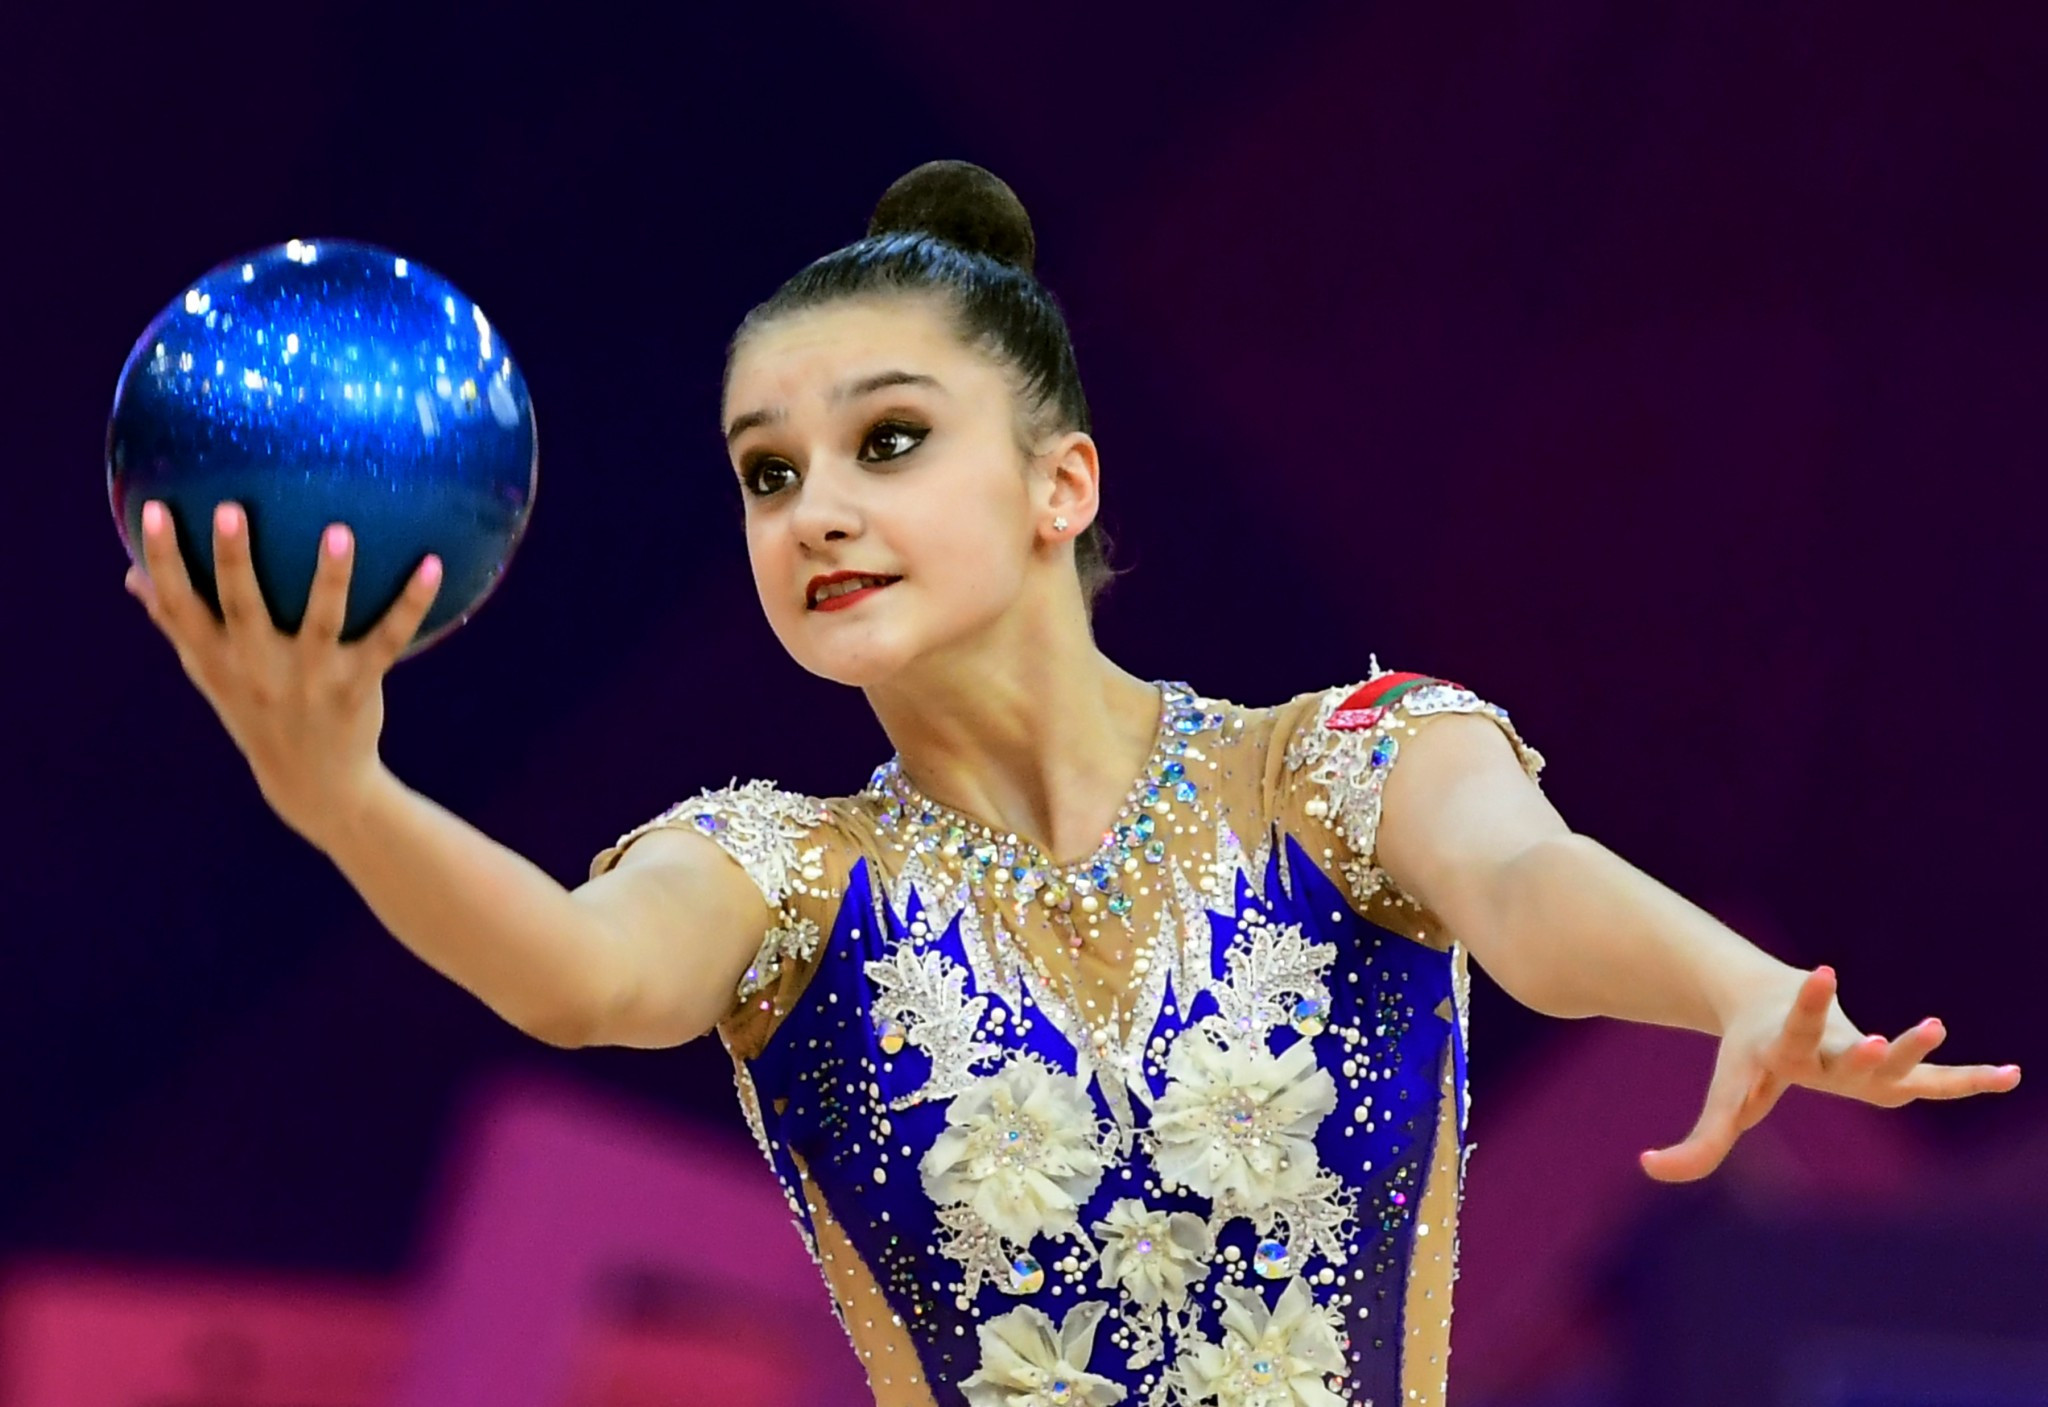 Alina Harnasko is another gymnast set to feature on home soil in Belarus ©Getty Images